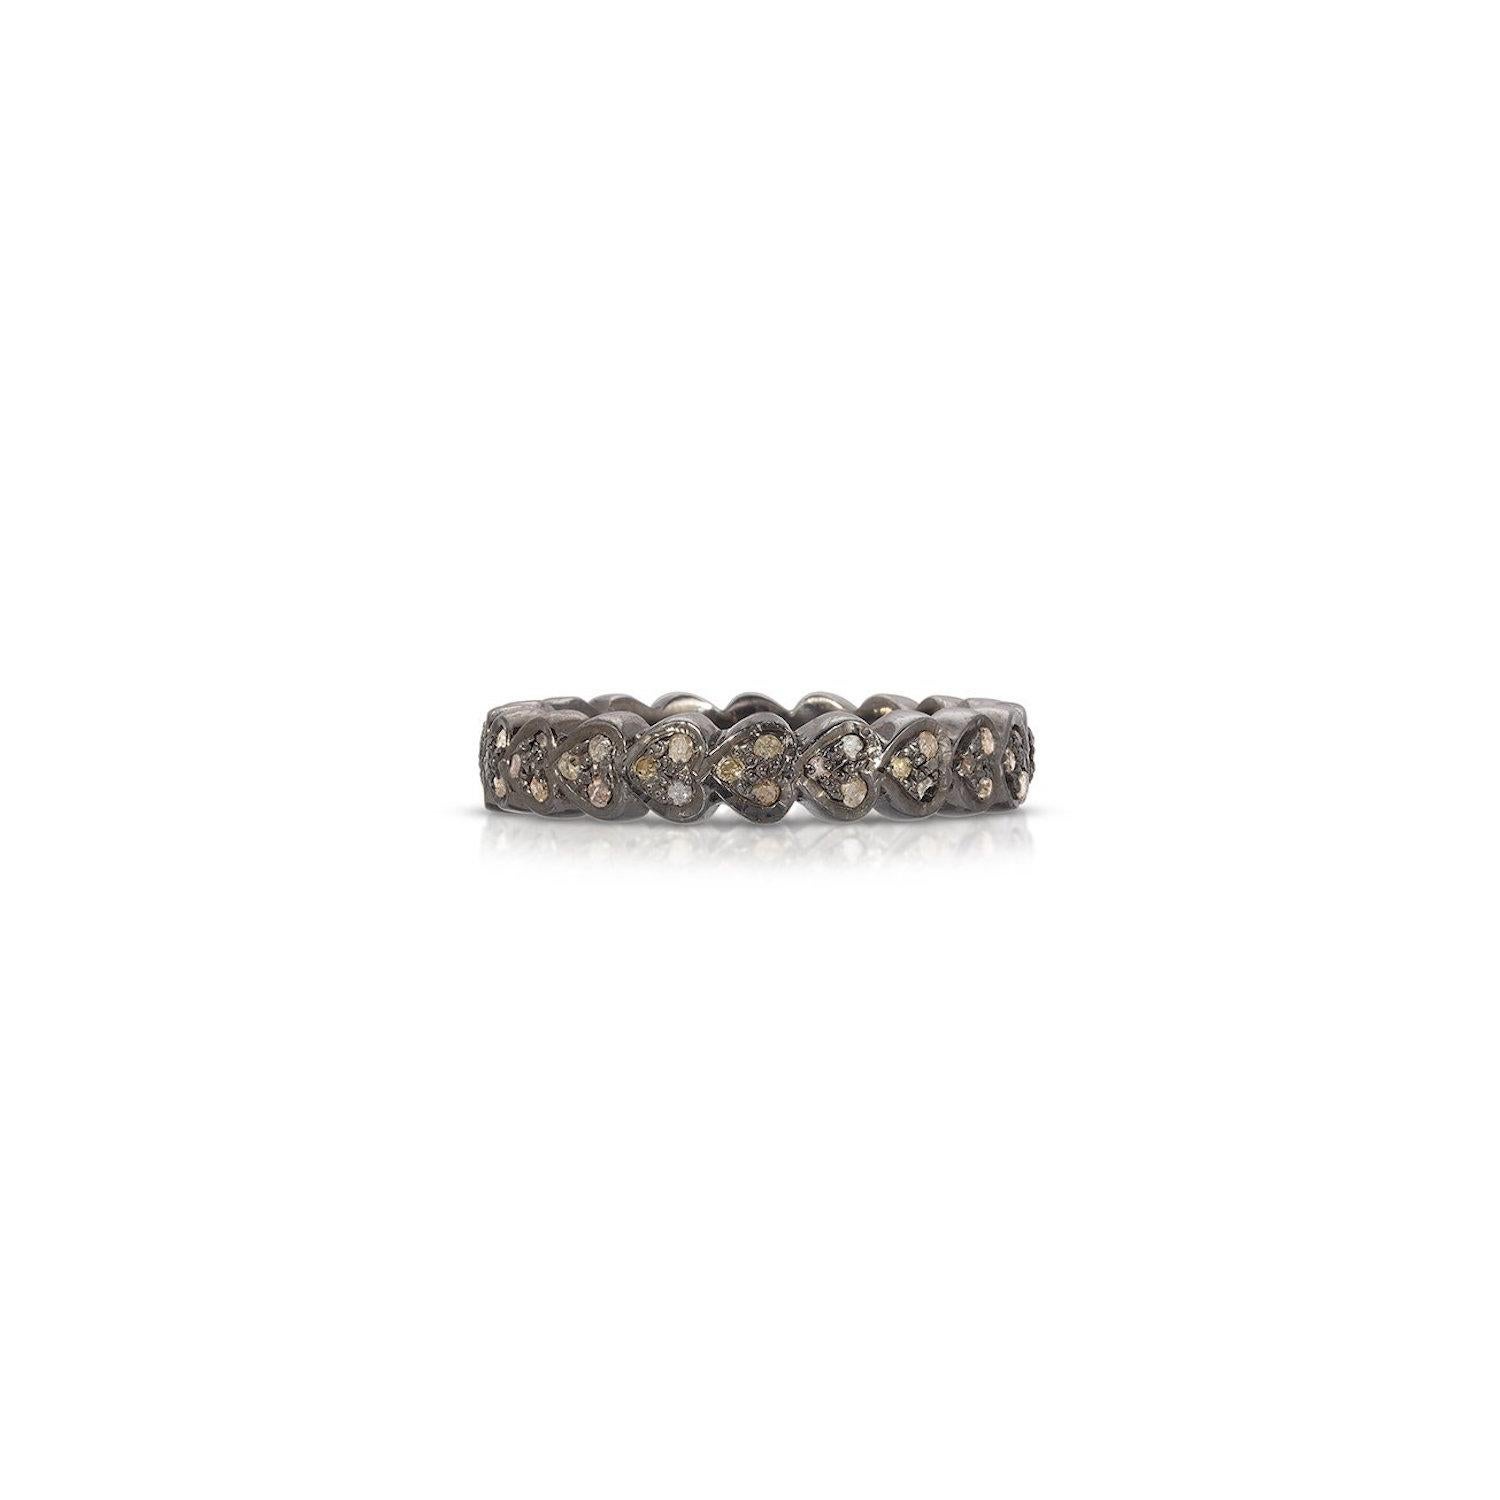 A beautiful fully set band ring of Blackened Oxidized Silver in a contemporary design. This band features .80 Carats of sparkling White Pavé Diamond set bauble hearts, fully set in a stylish blackened silver band.